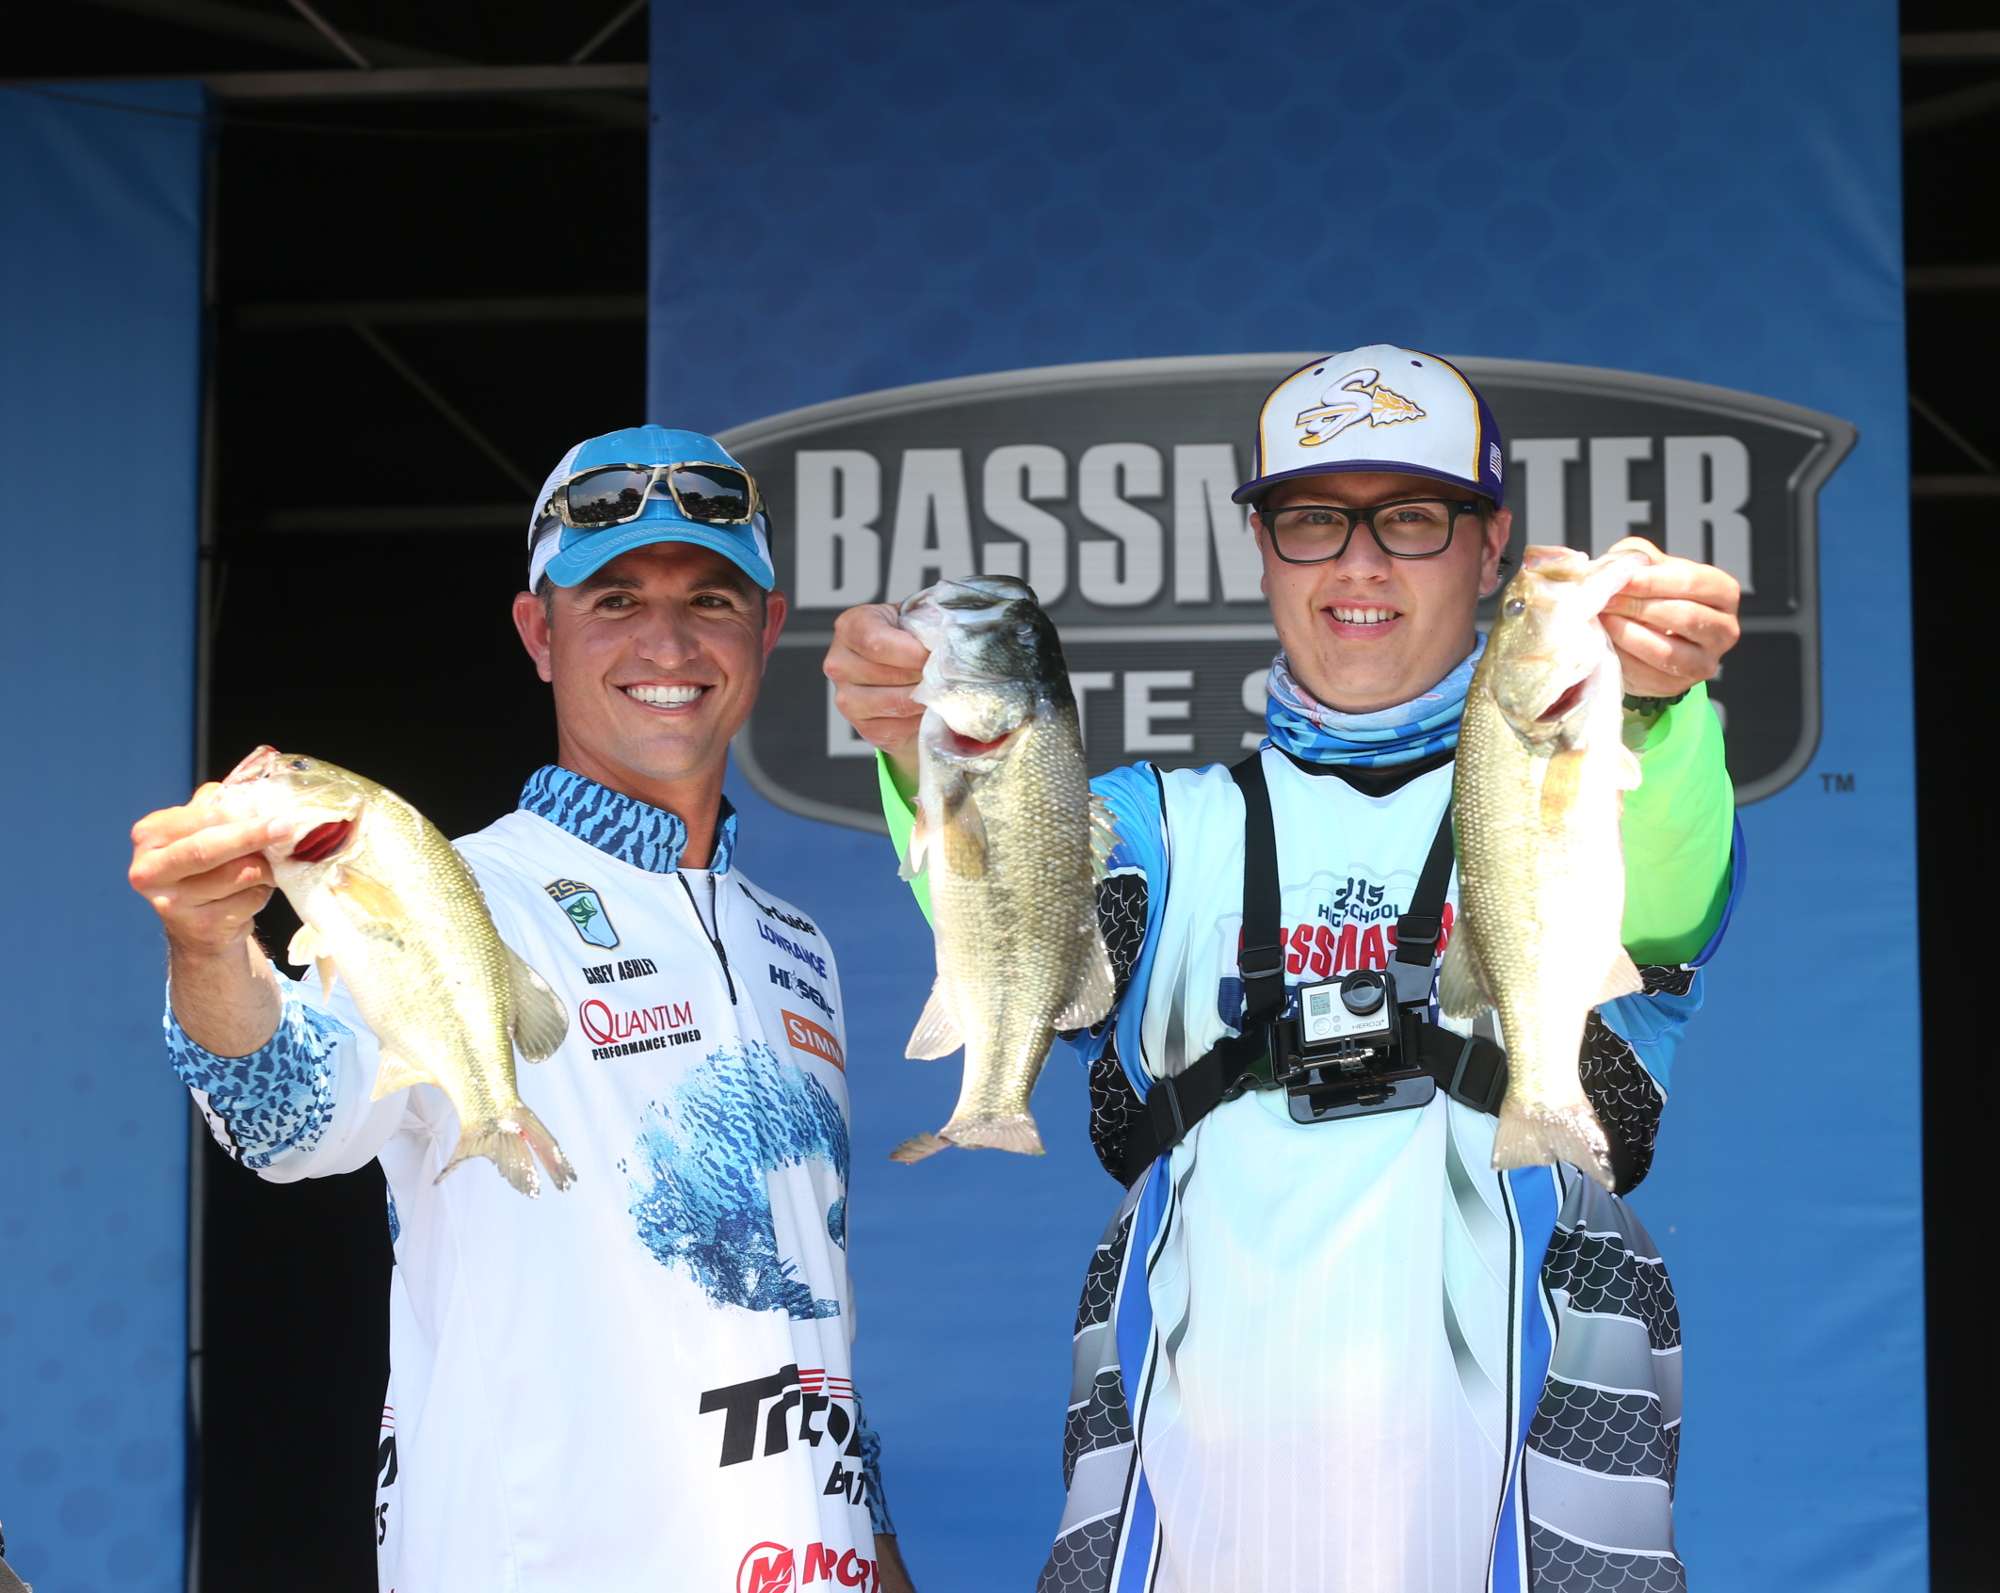 Reigning Classic champ Casey Ashley fished with Jared Penton. The duo ended with three fish for 6-11.